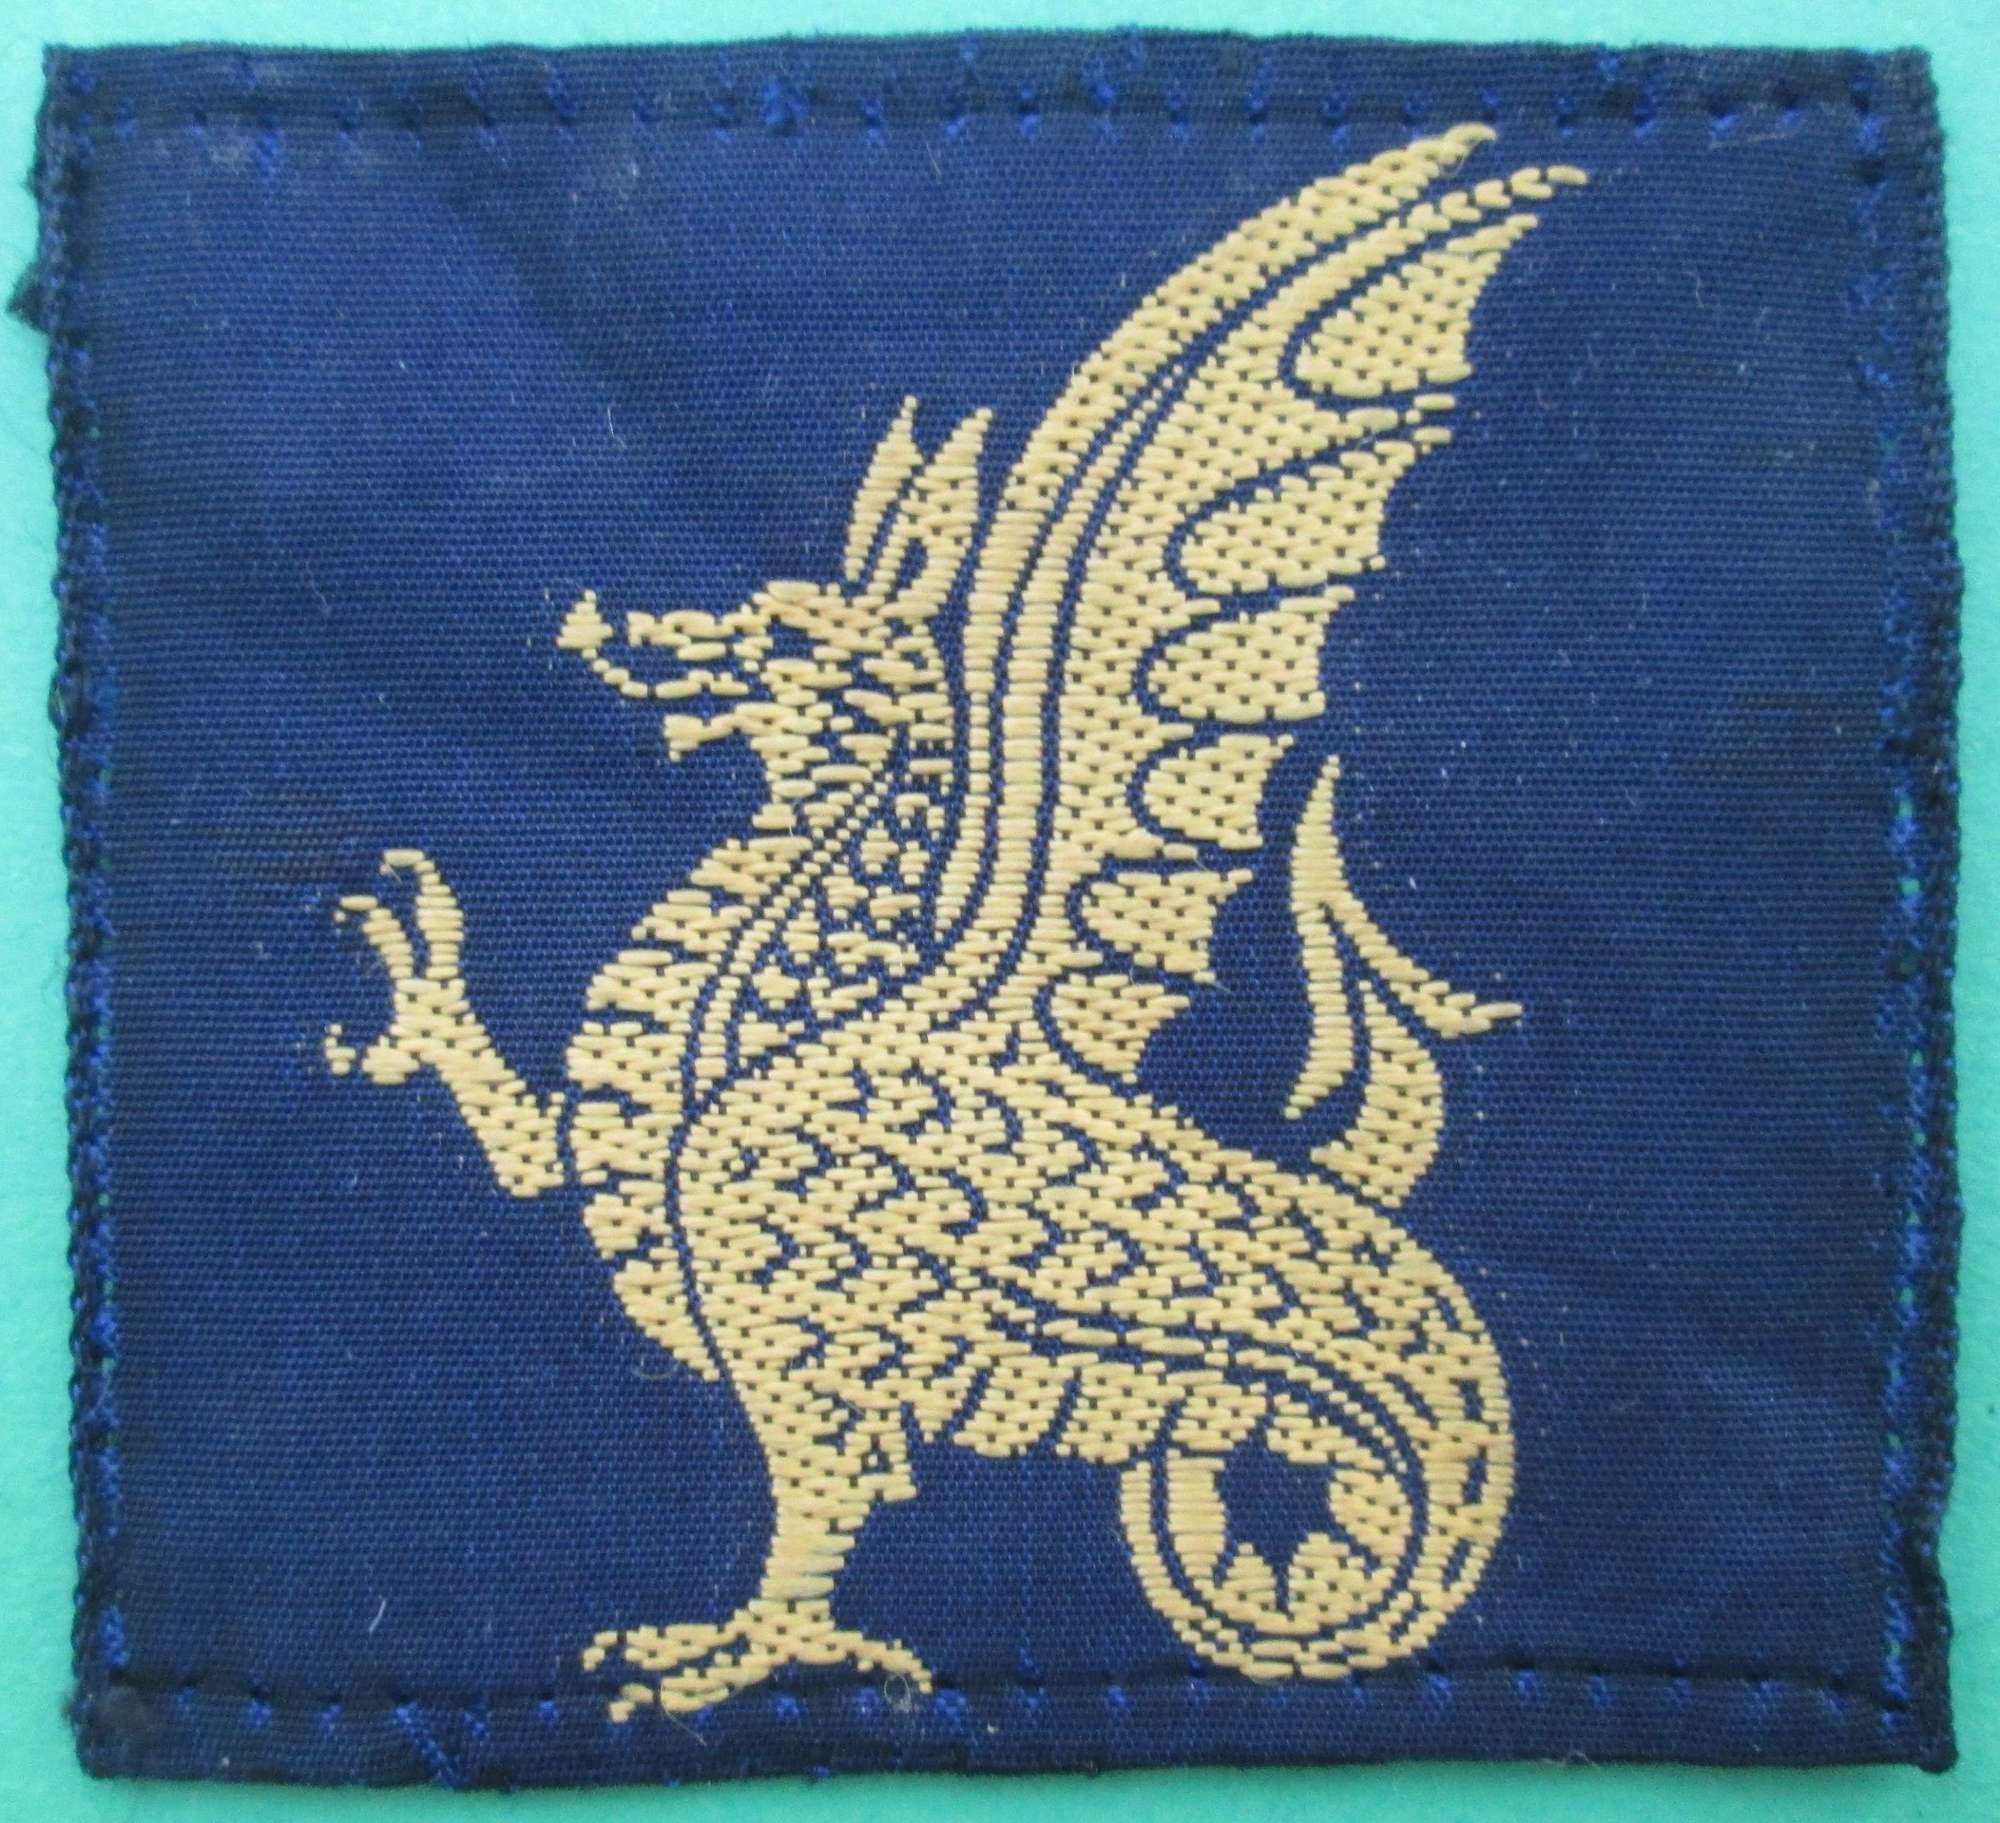 A 43rd (WESSEX) INFANTRY DIVISION PATCH